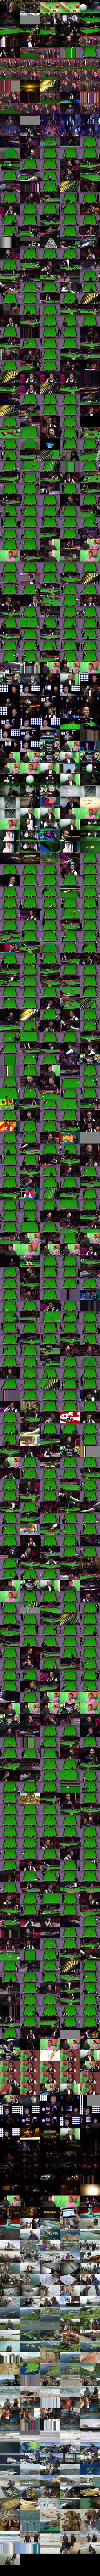 Masters Snooker (BBC TWO) Tuesday 17 January 2017 13:00 - 17:00